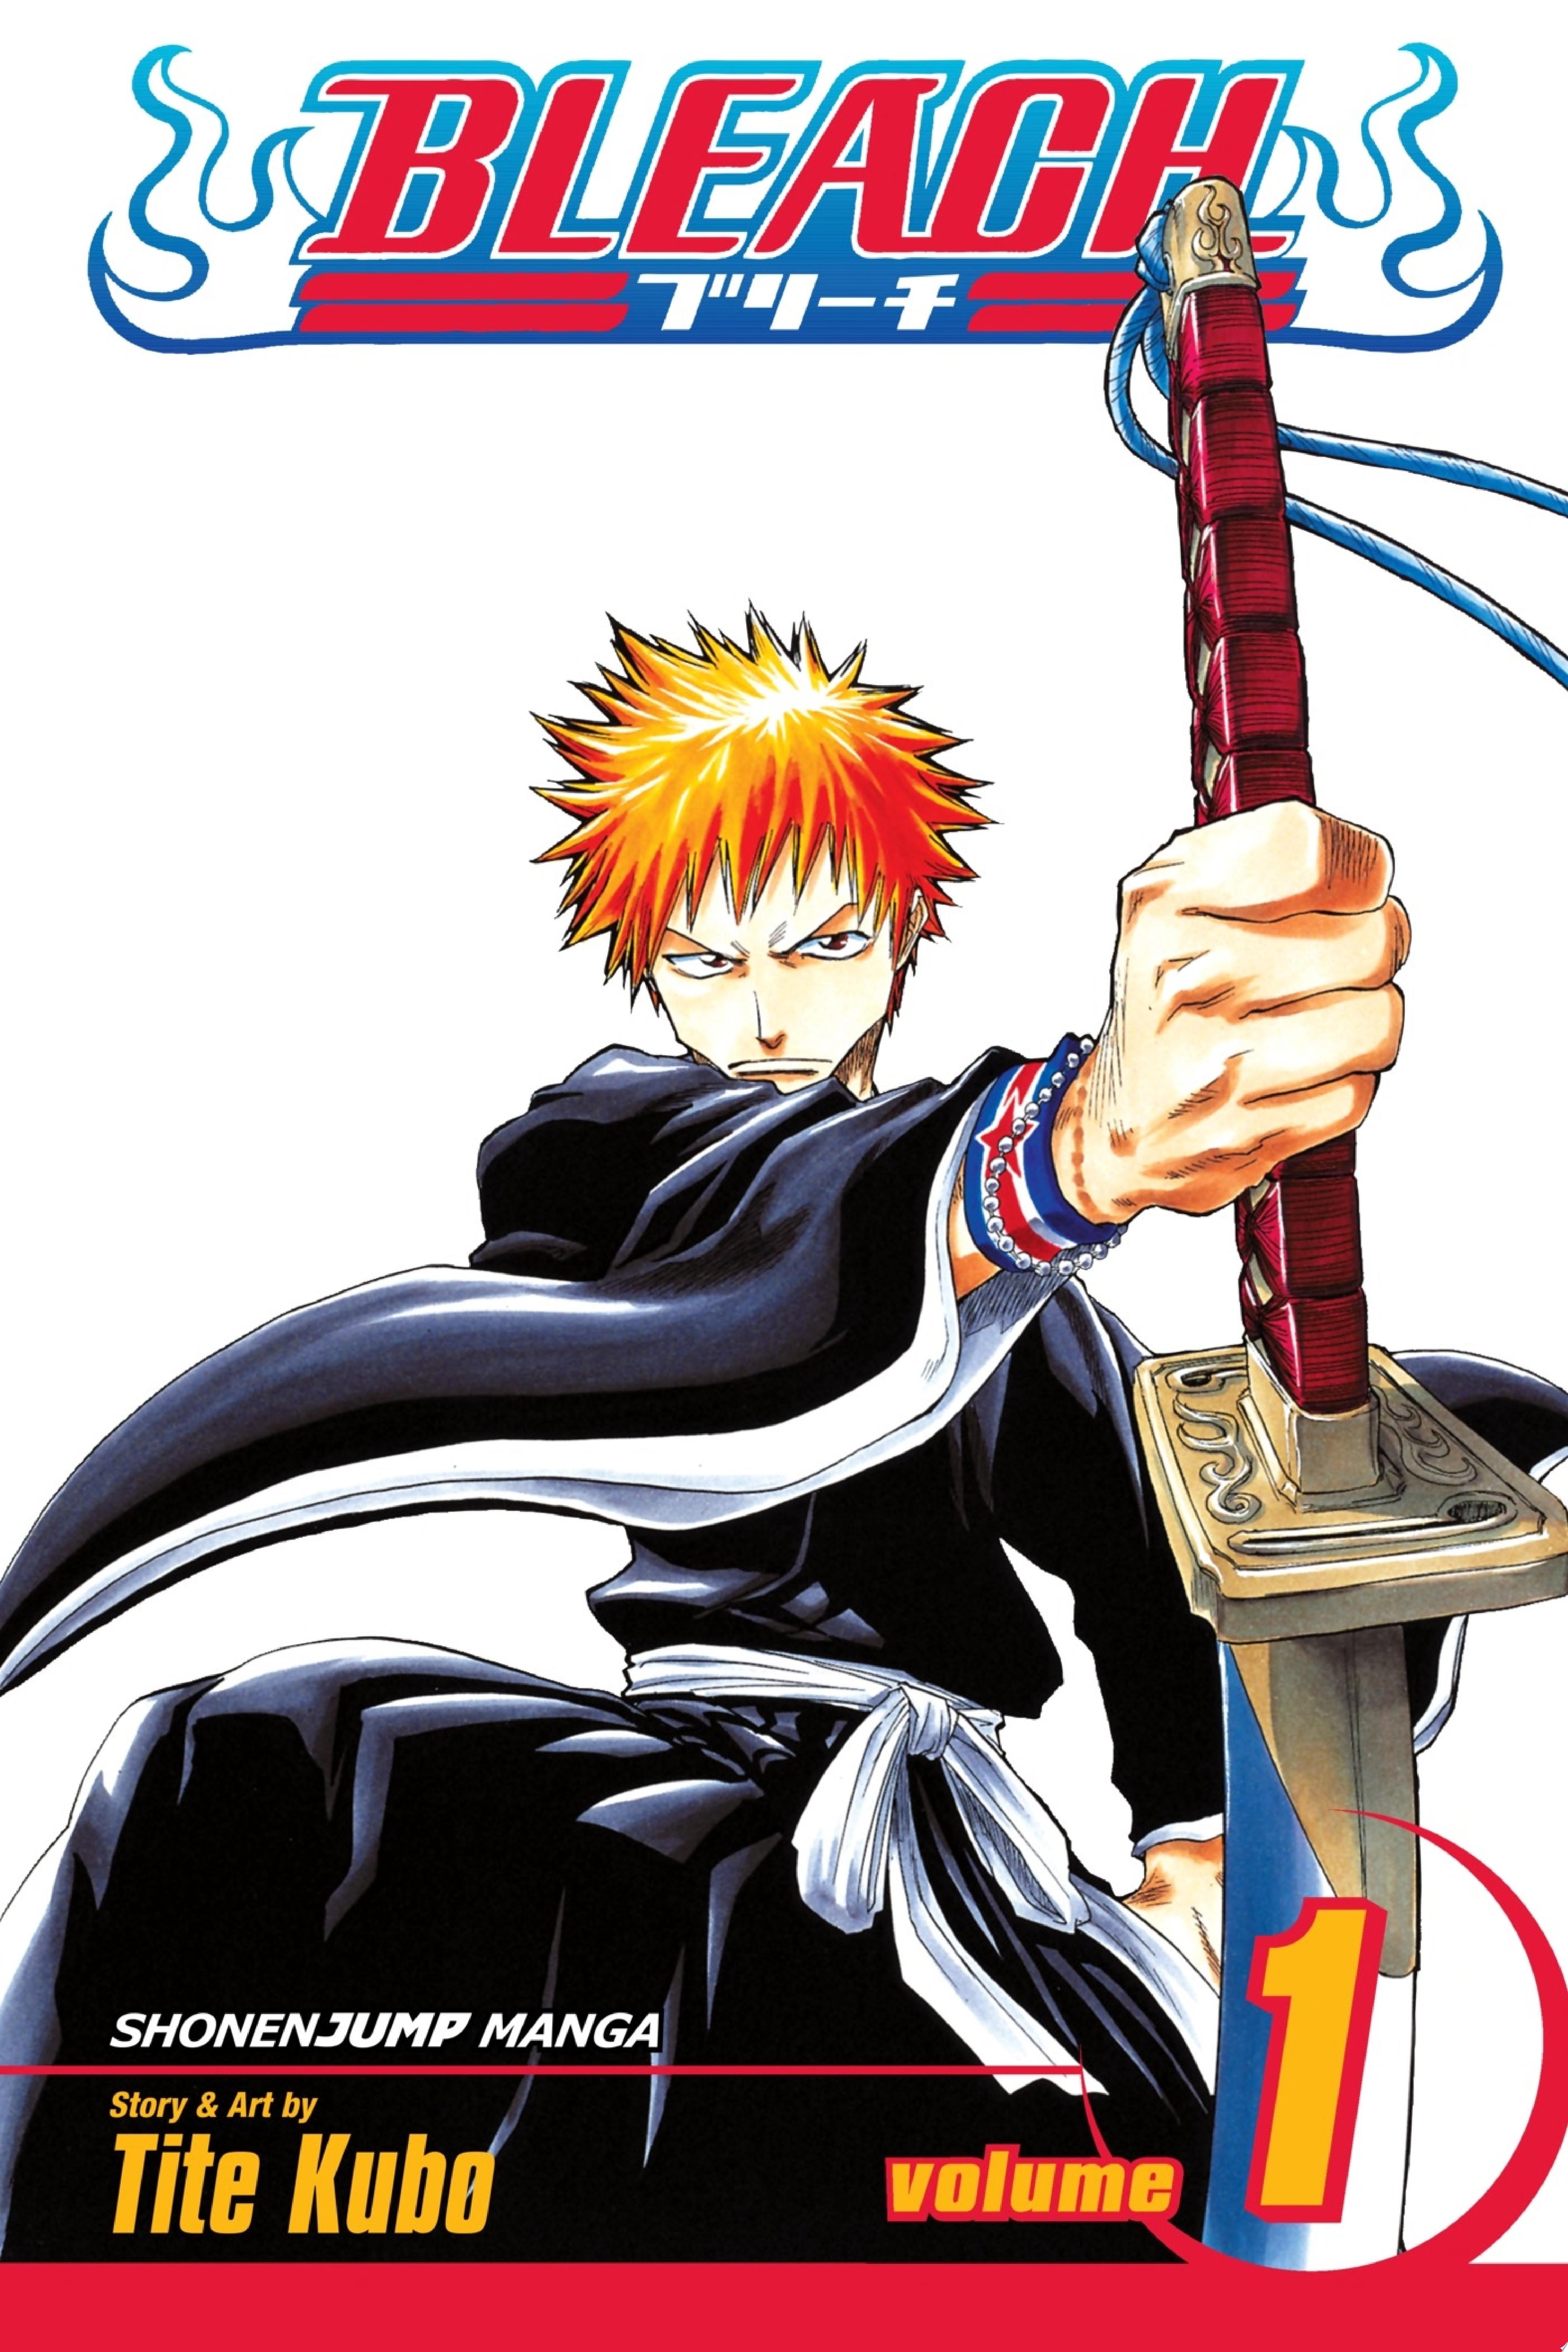 Image for "Bleach, Vol. 1"